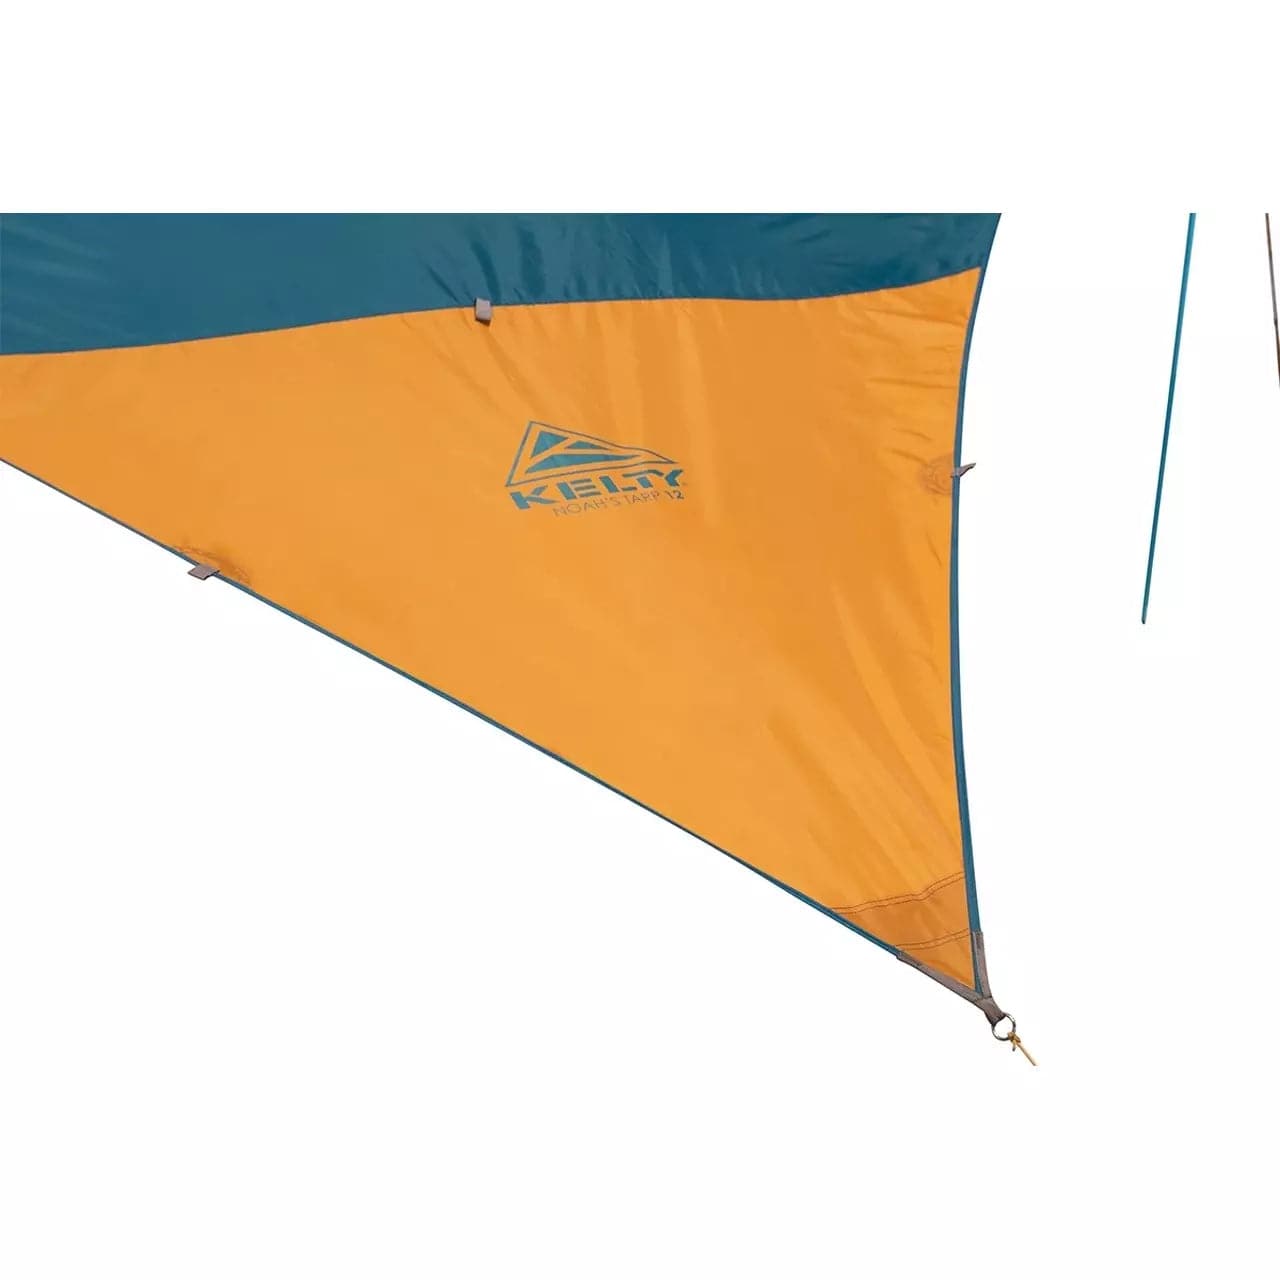 Featuring the Noah's Tarp bimini manufactured by Kelty shown here from a second angle.